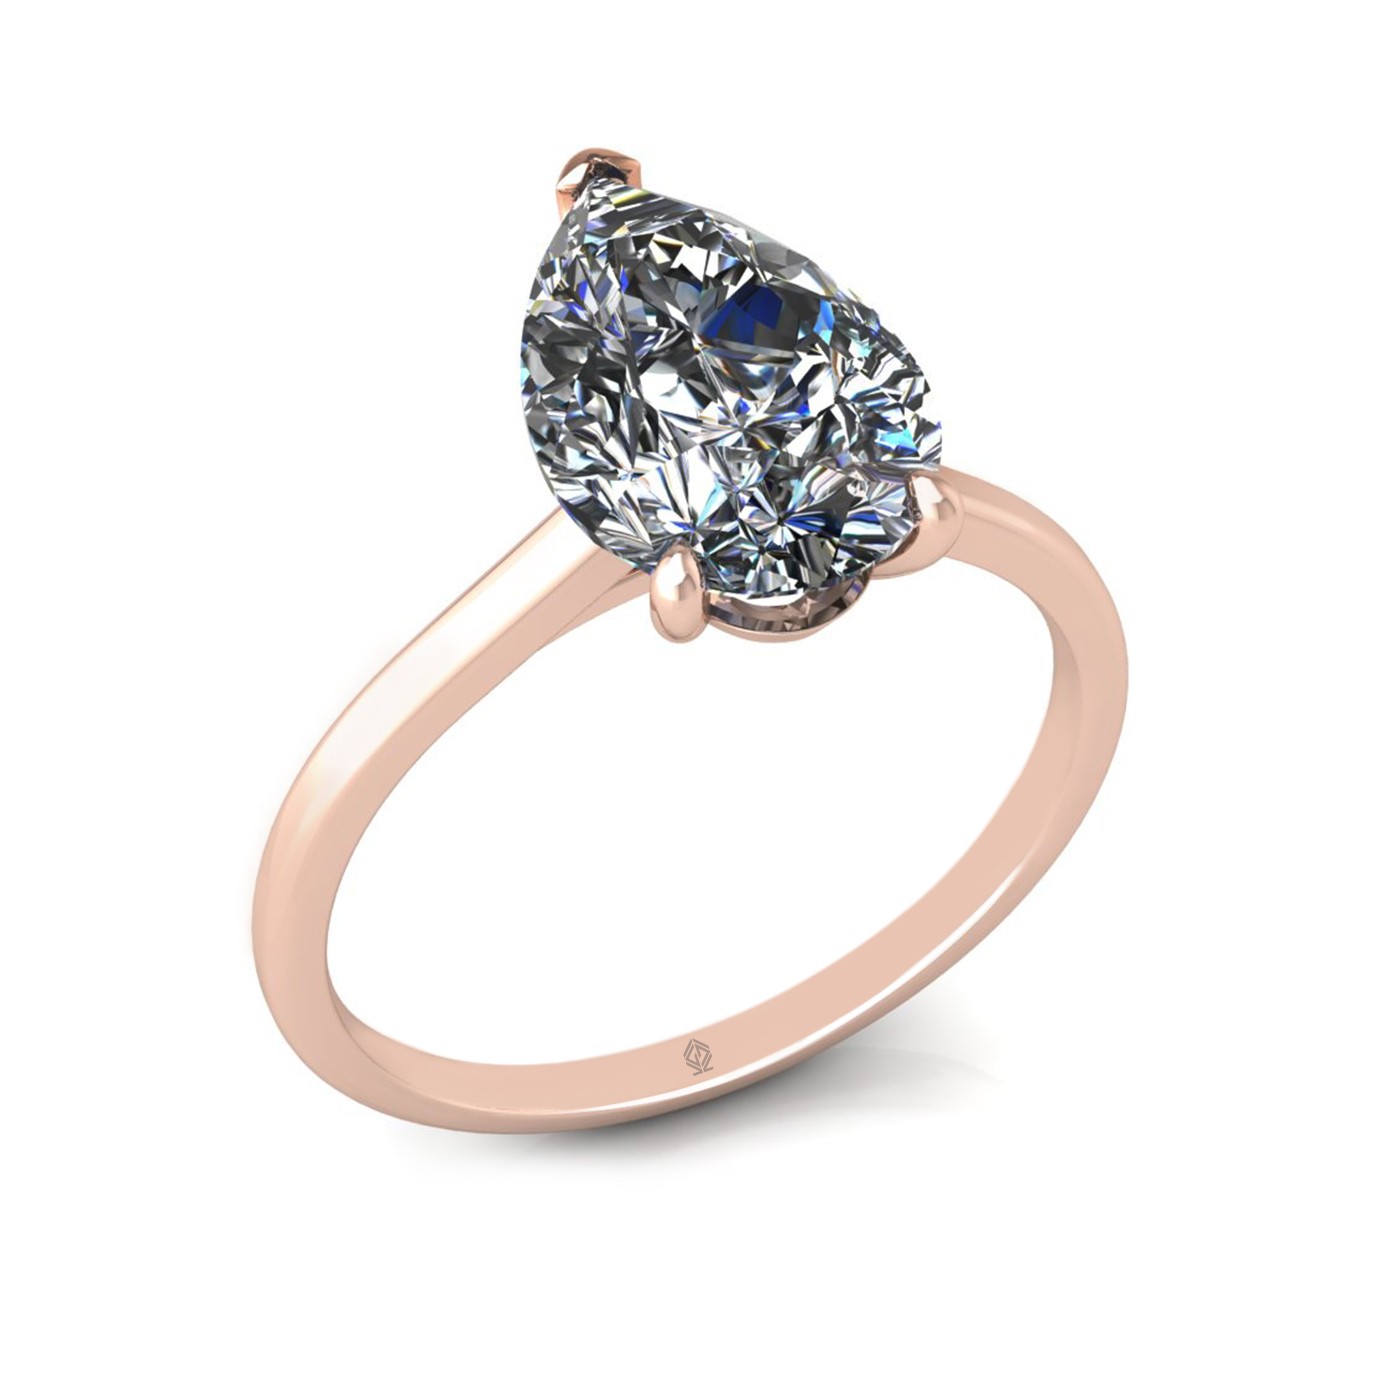 18k rose gold  2,50 ct 3 prongs solitaire pear cut diamond engagement ring with whisper thin band